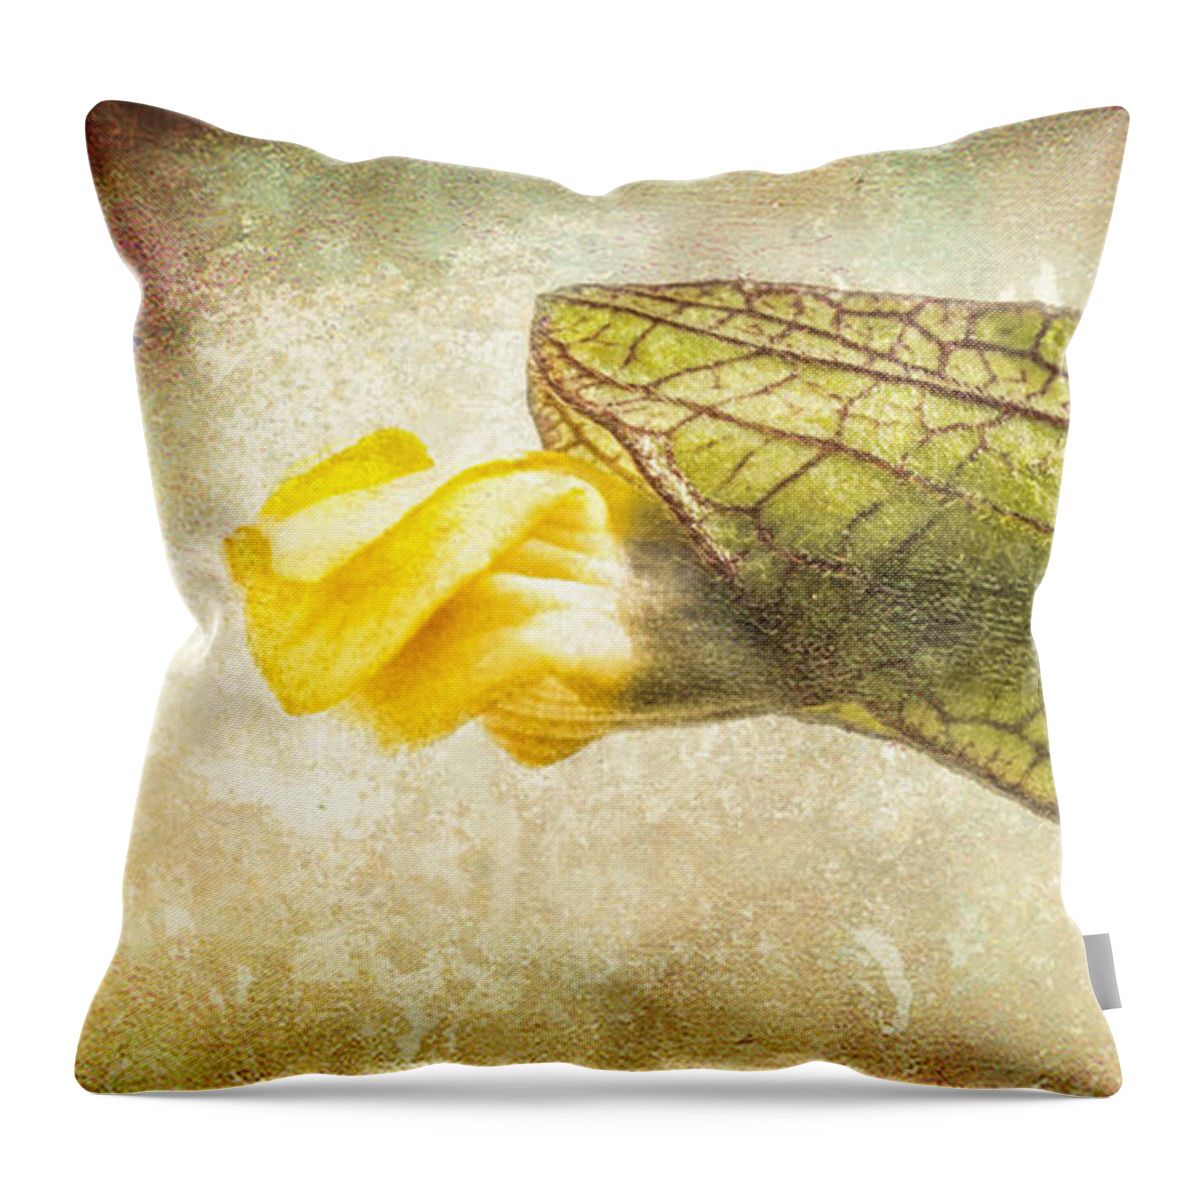 Bud Throw Pillow featuring the photograph Emerging by Caitlyn Grasso